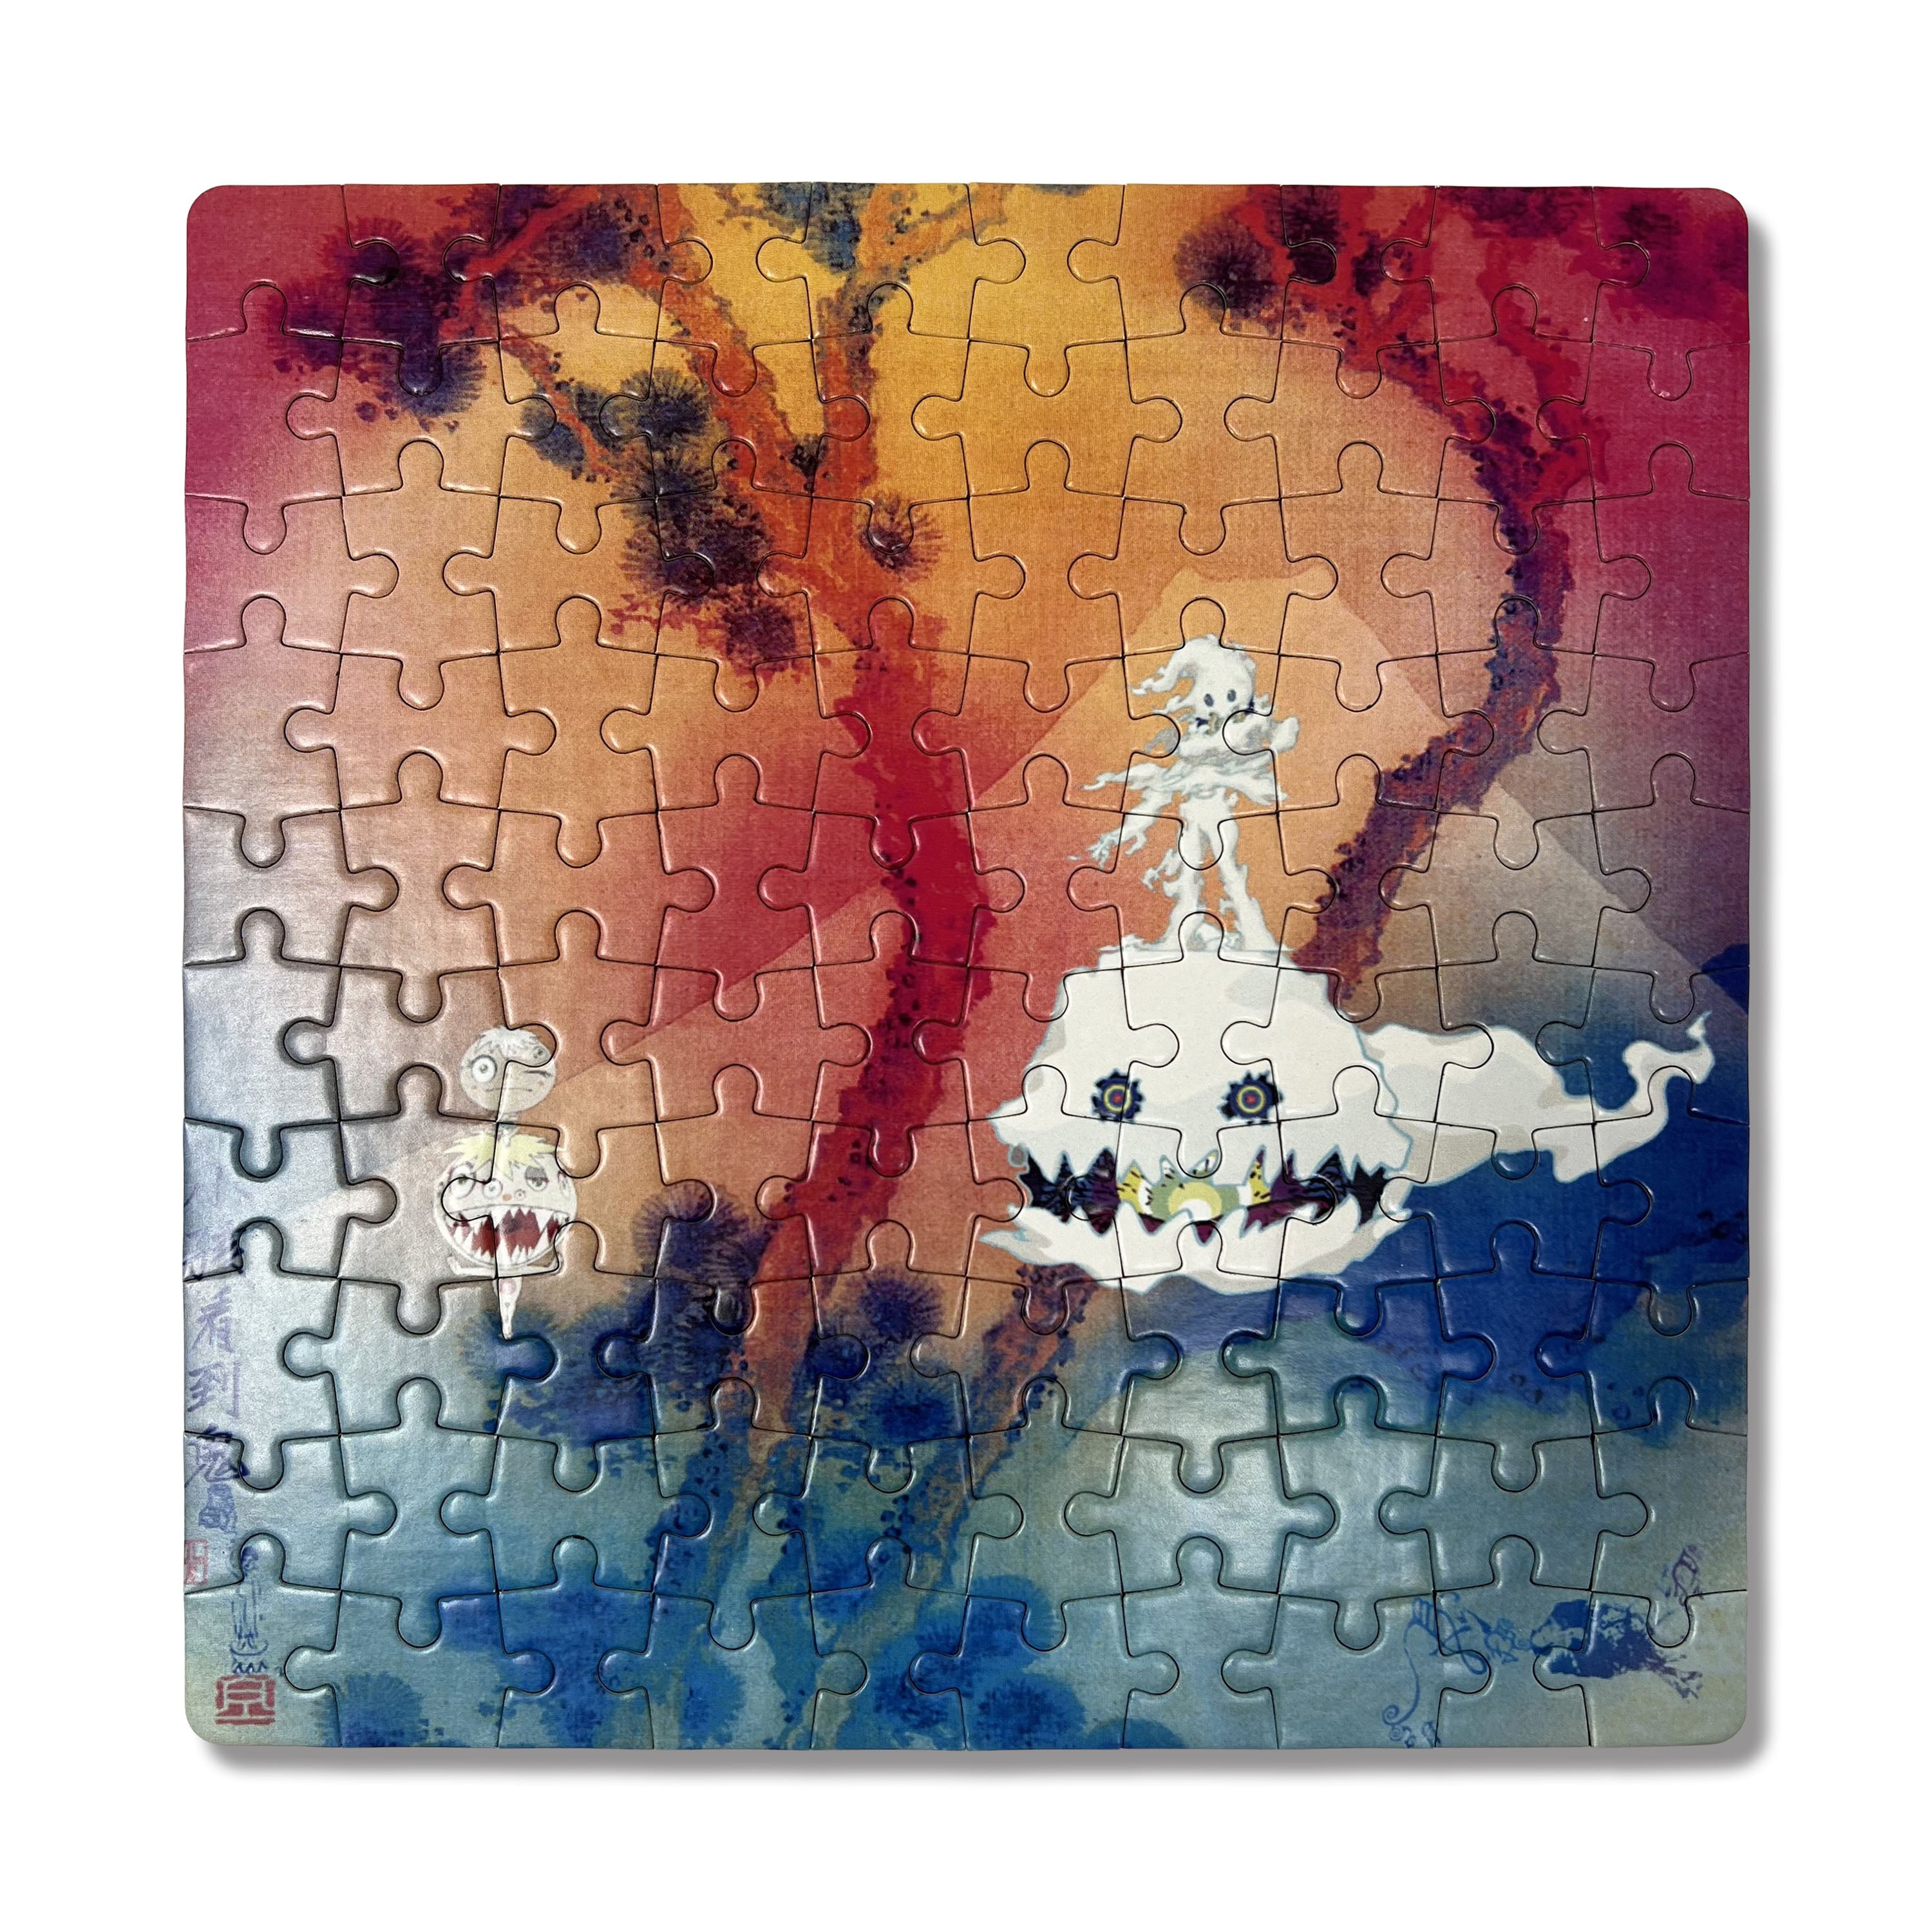 KIDS SEE GHOSTS Puzzle